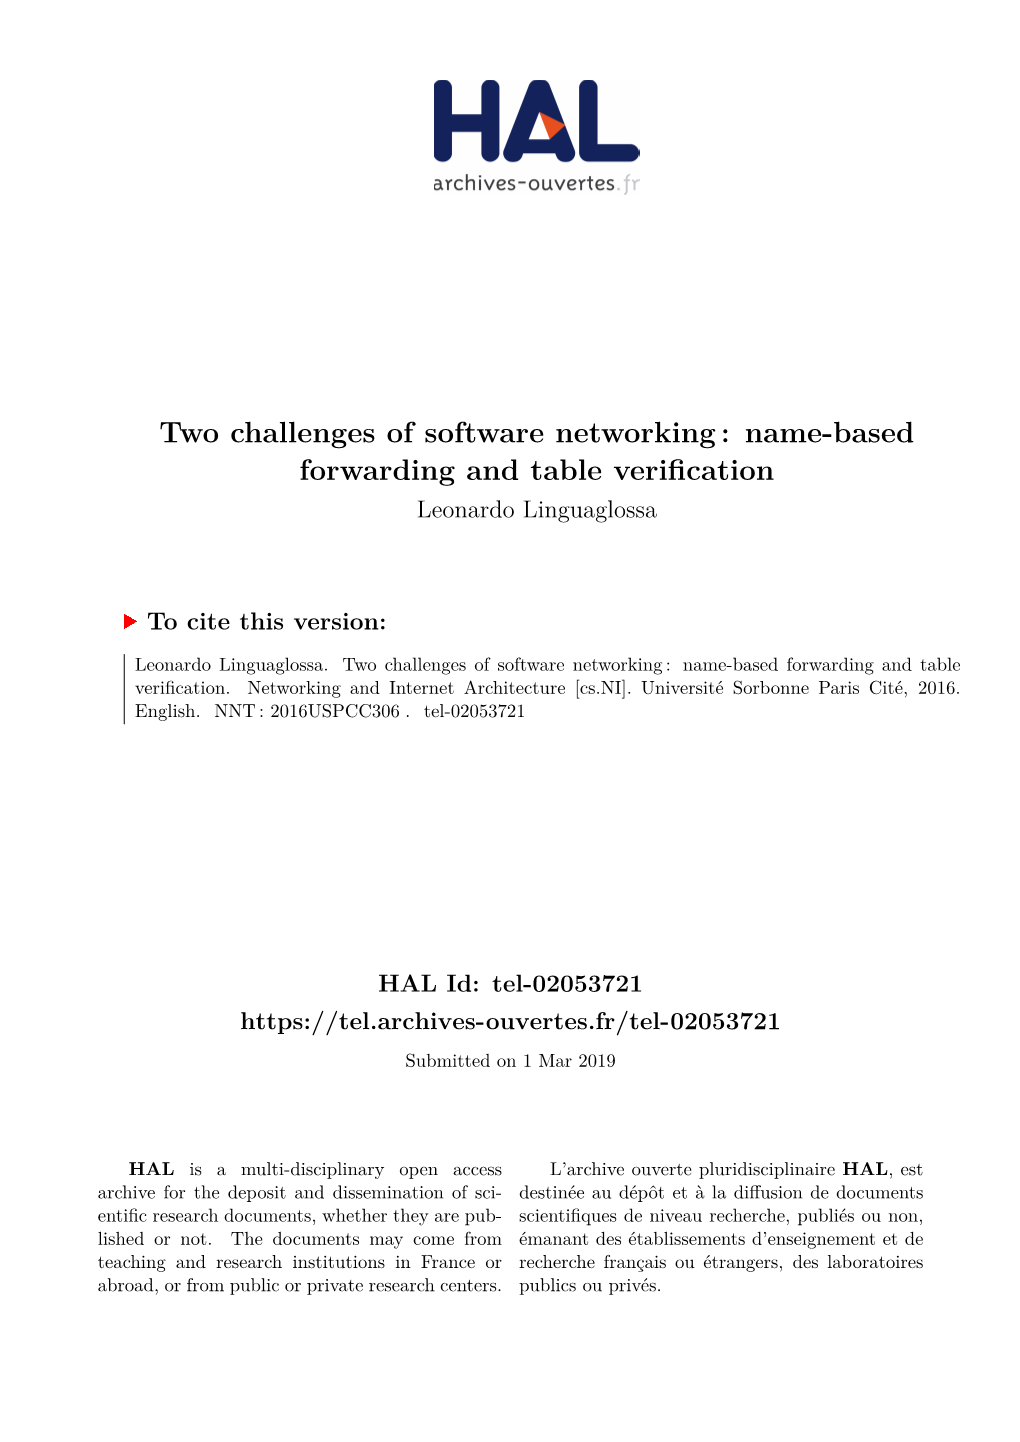 Two Challenges of Software Networking: Name-Based